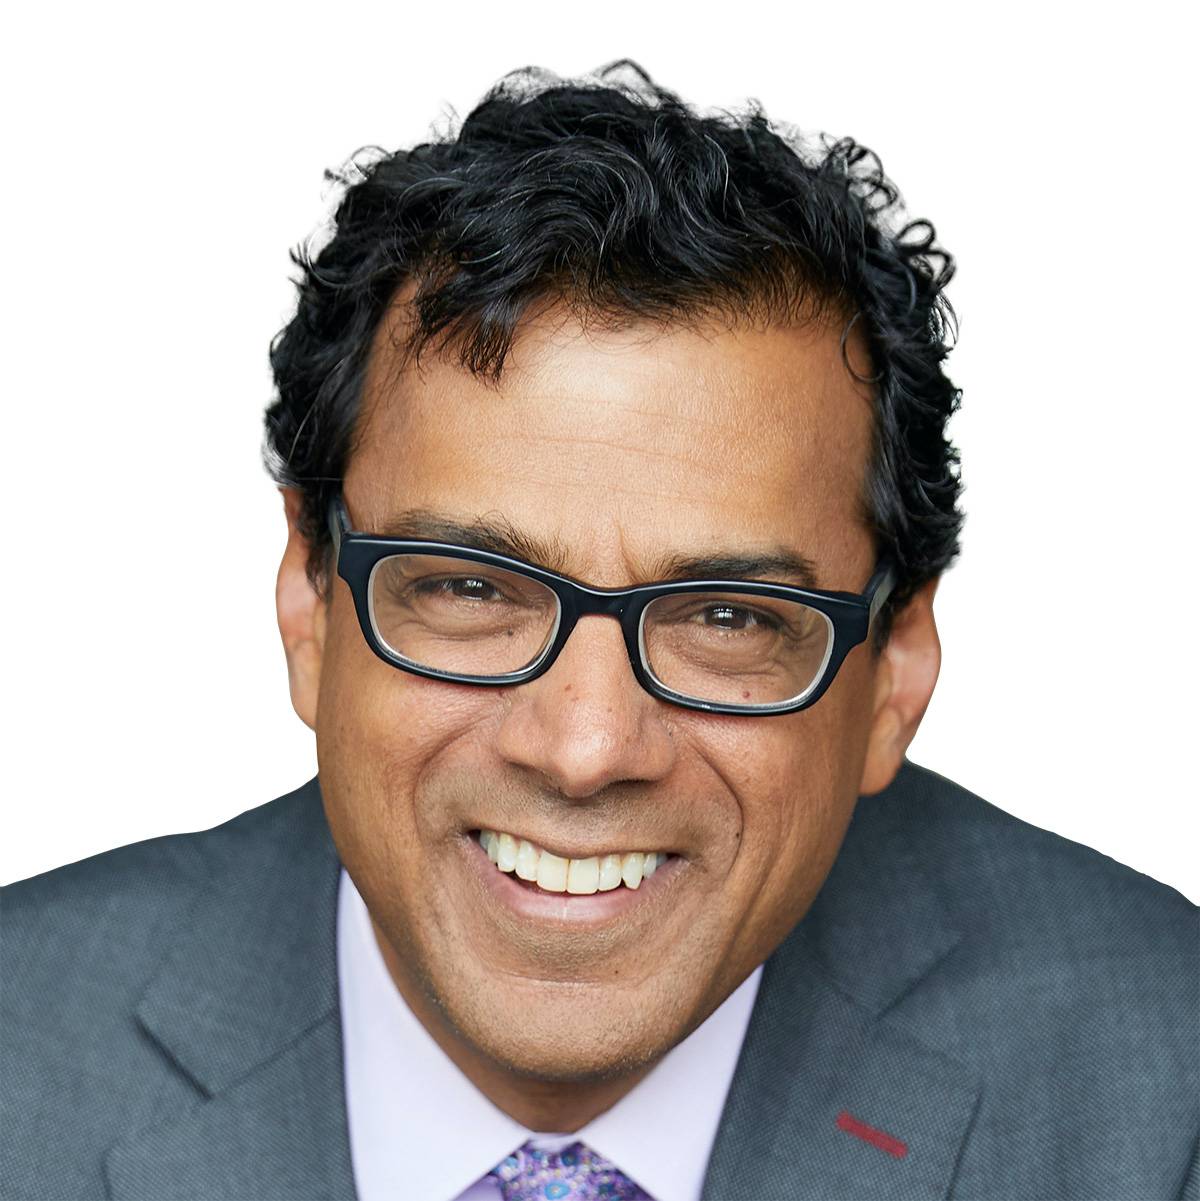 USAID’s Atul Gawande discusses the challenges of misinformation during talk at Johns Hopkins